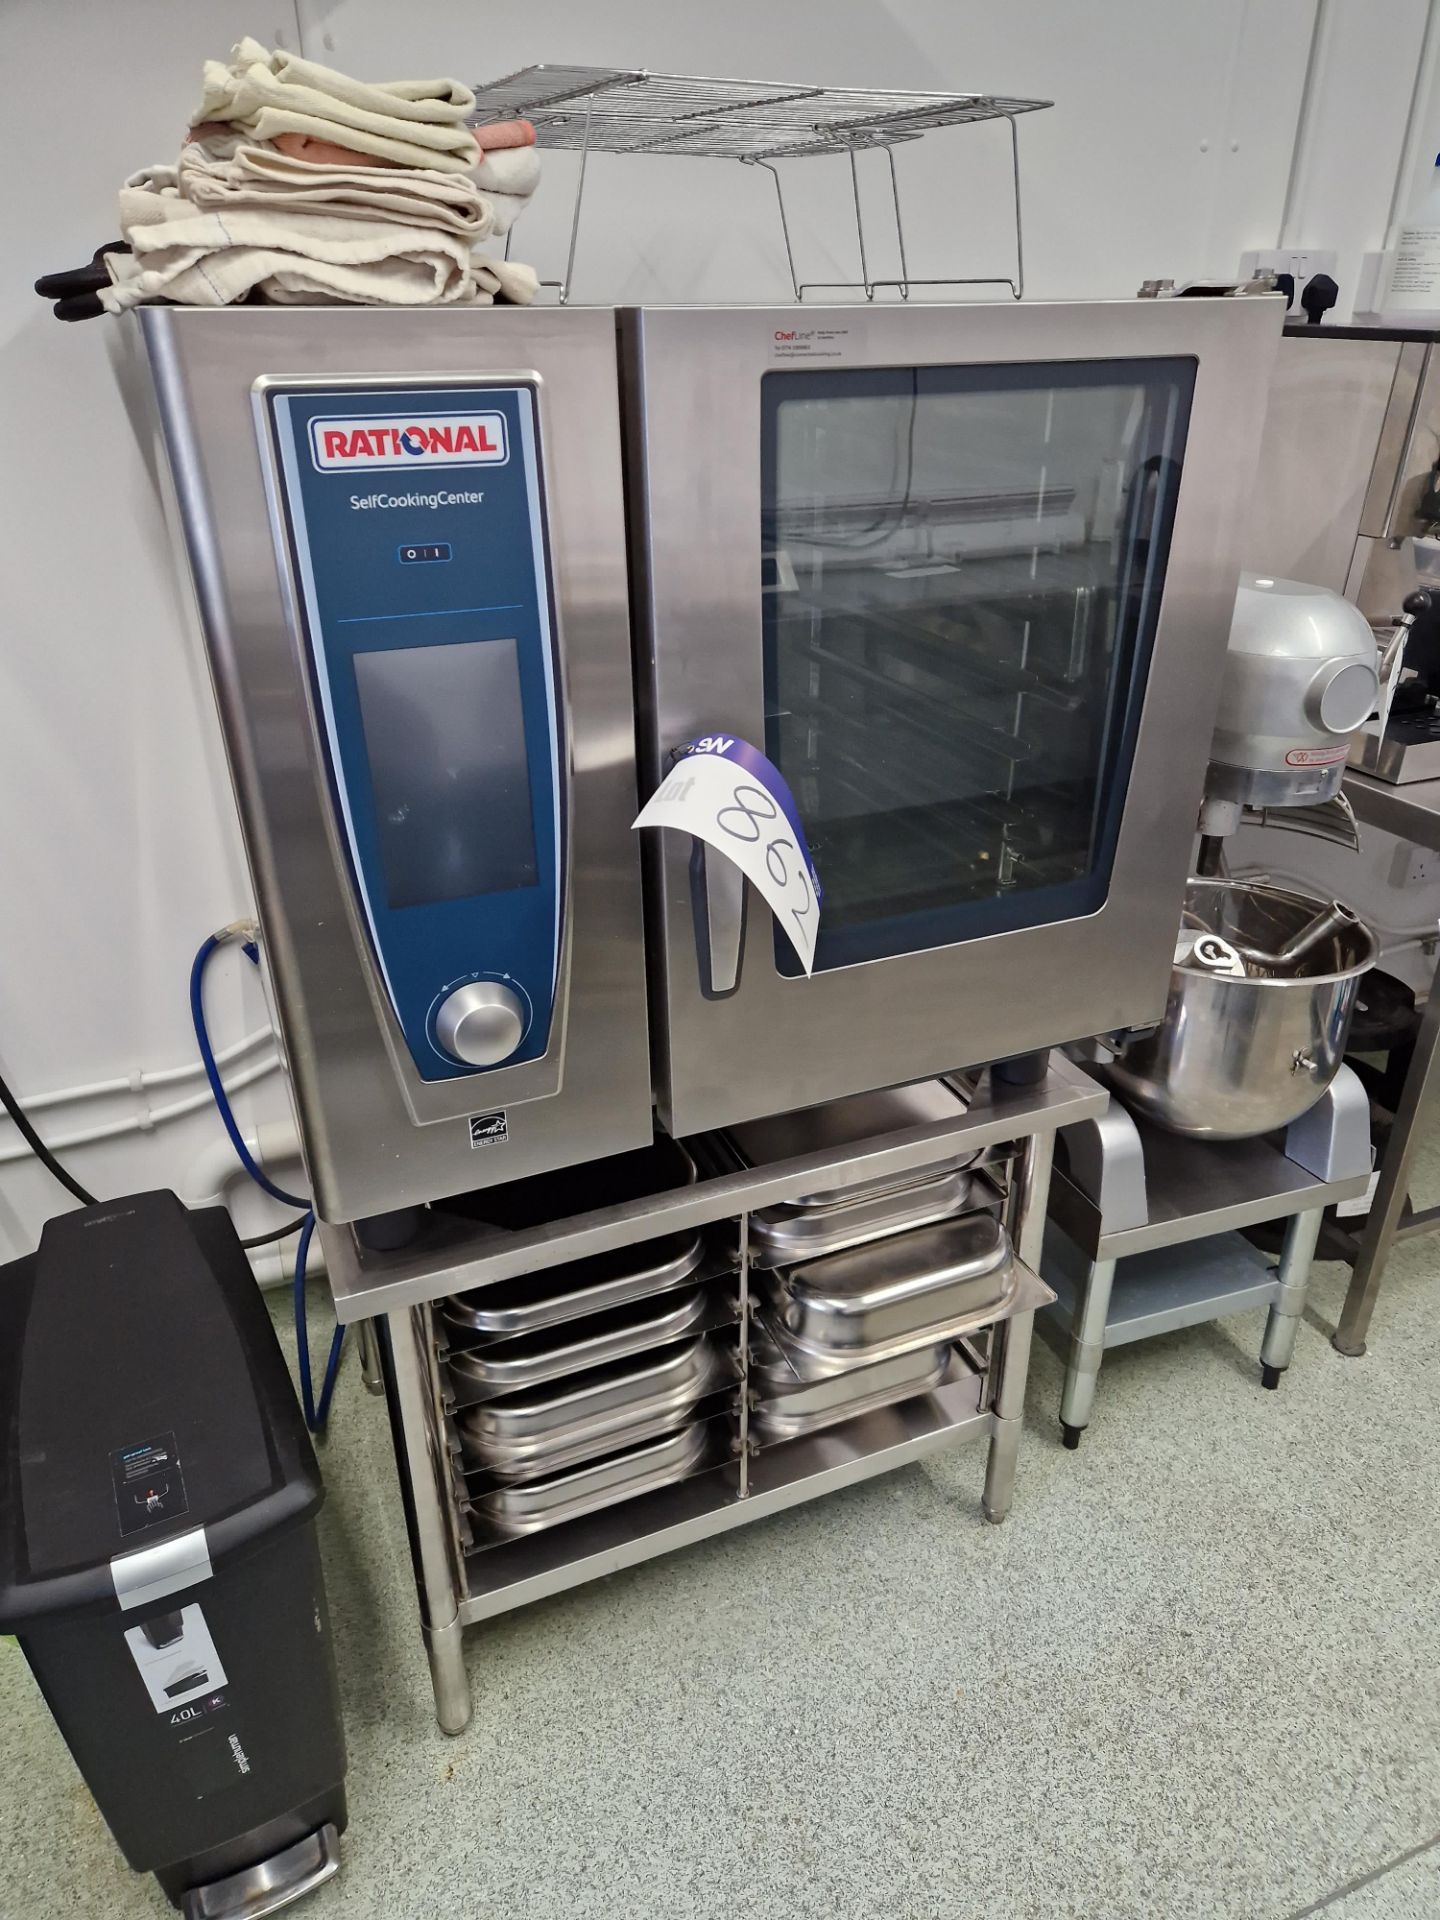 RATIONAL SCC WE 61 Combi Oven, Serial No. E61SI19012720301 with Stainless Steel 12 Section Stand (